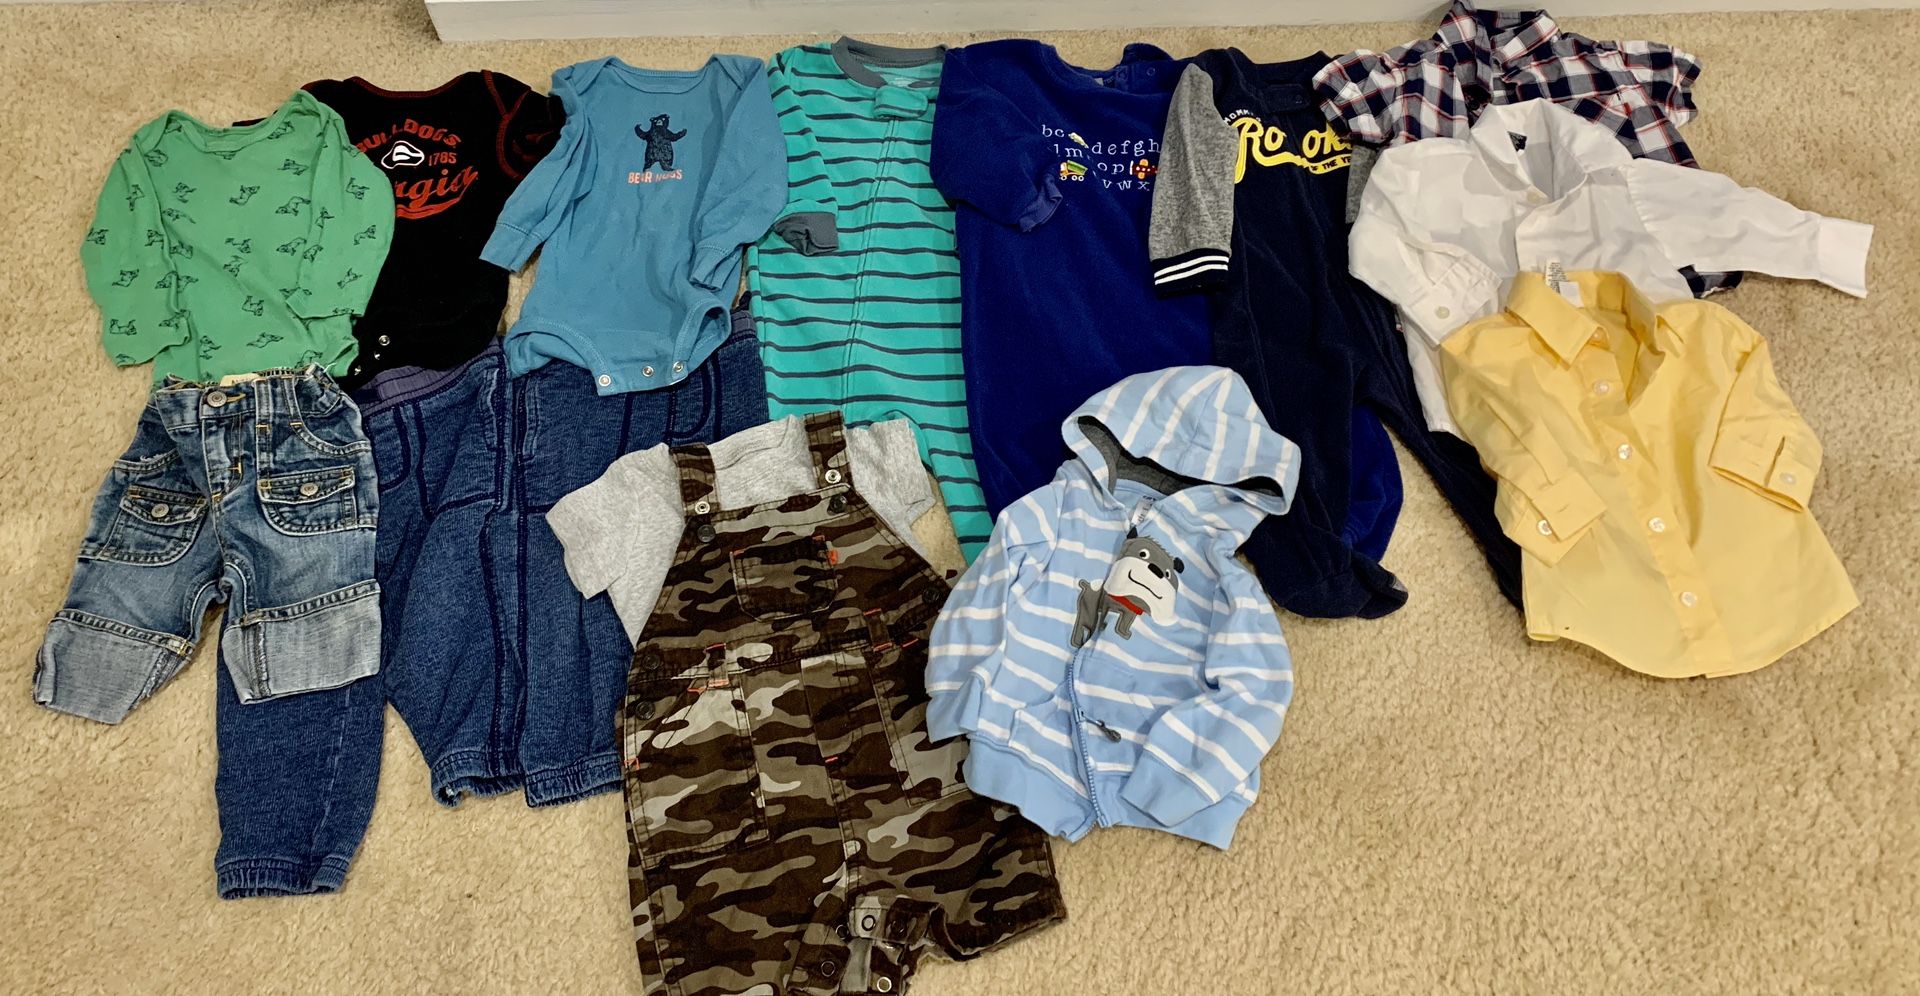 FREE!!! Carter 12m Baby Boy clothes - 8 outfits, 3 dress shirts and 1 hoodie